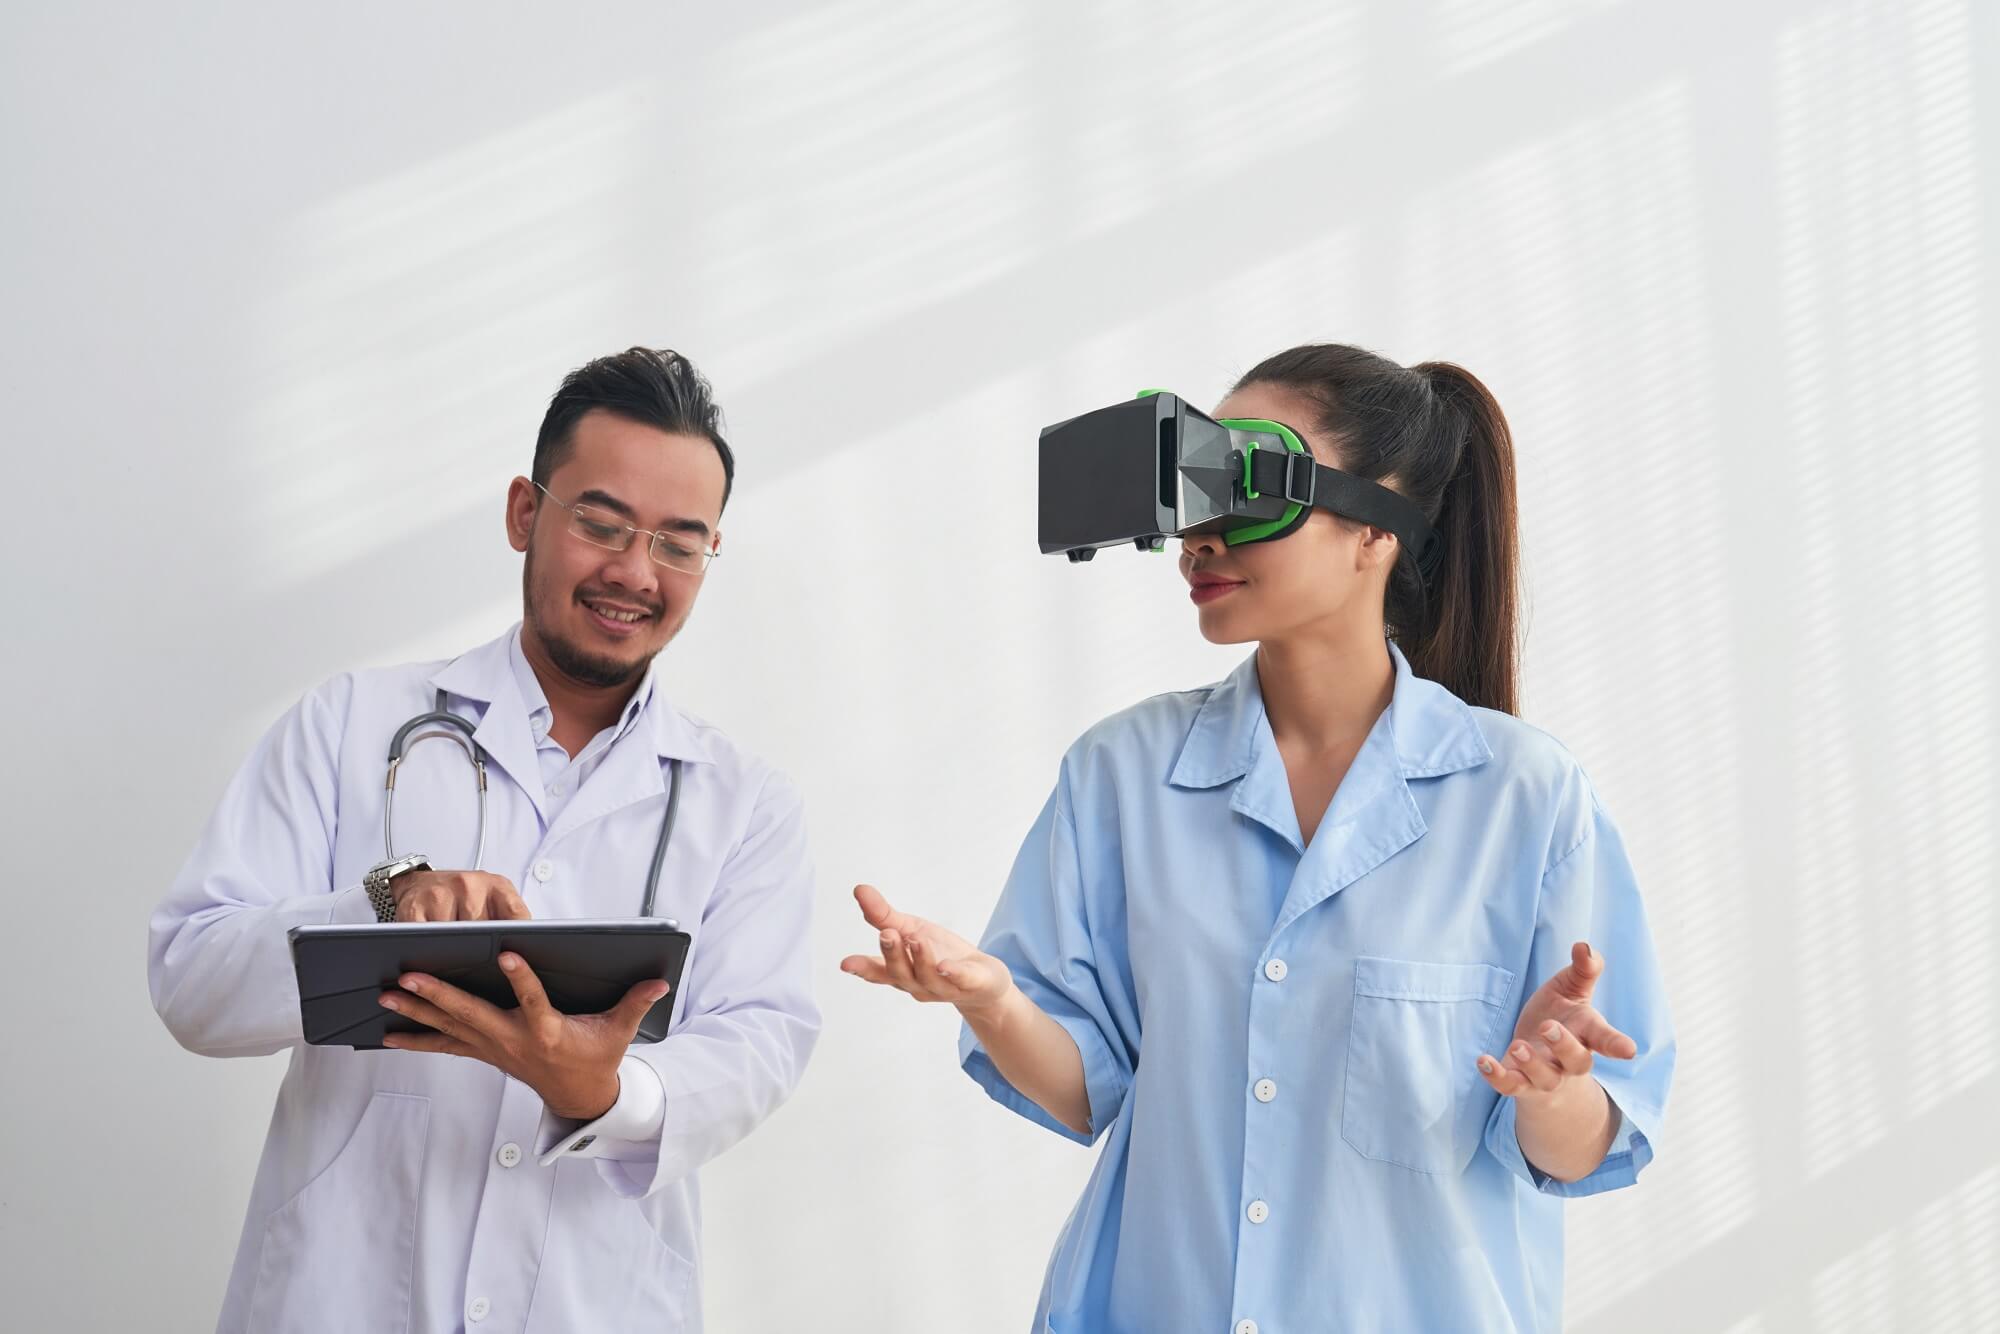 Smiling doctor controlling virtual reality application